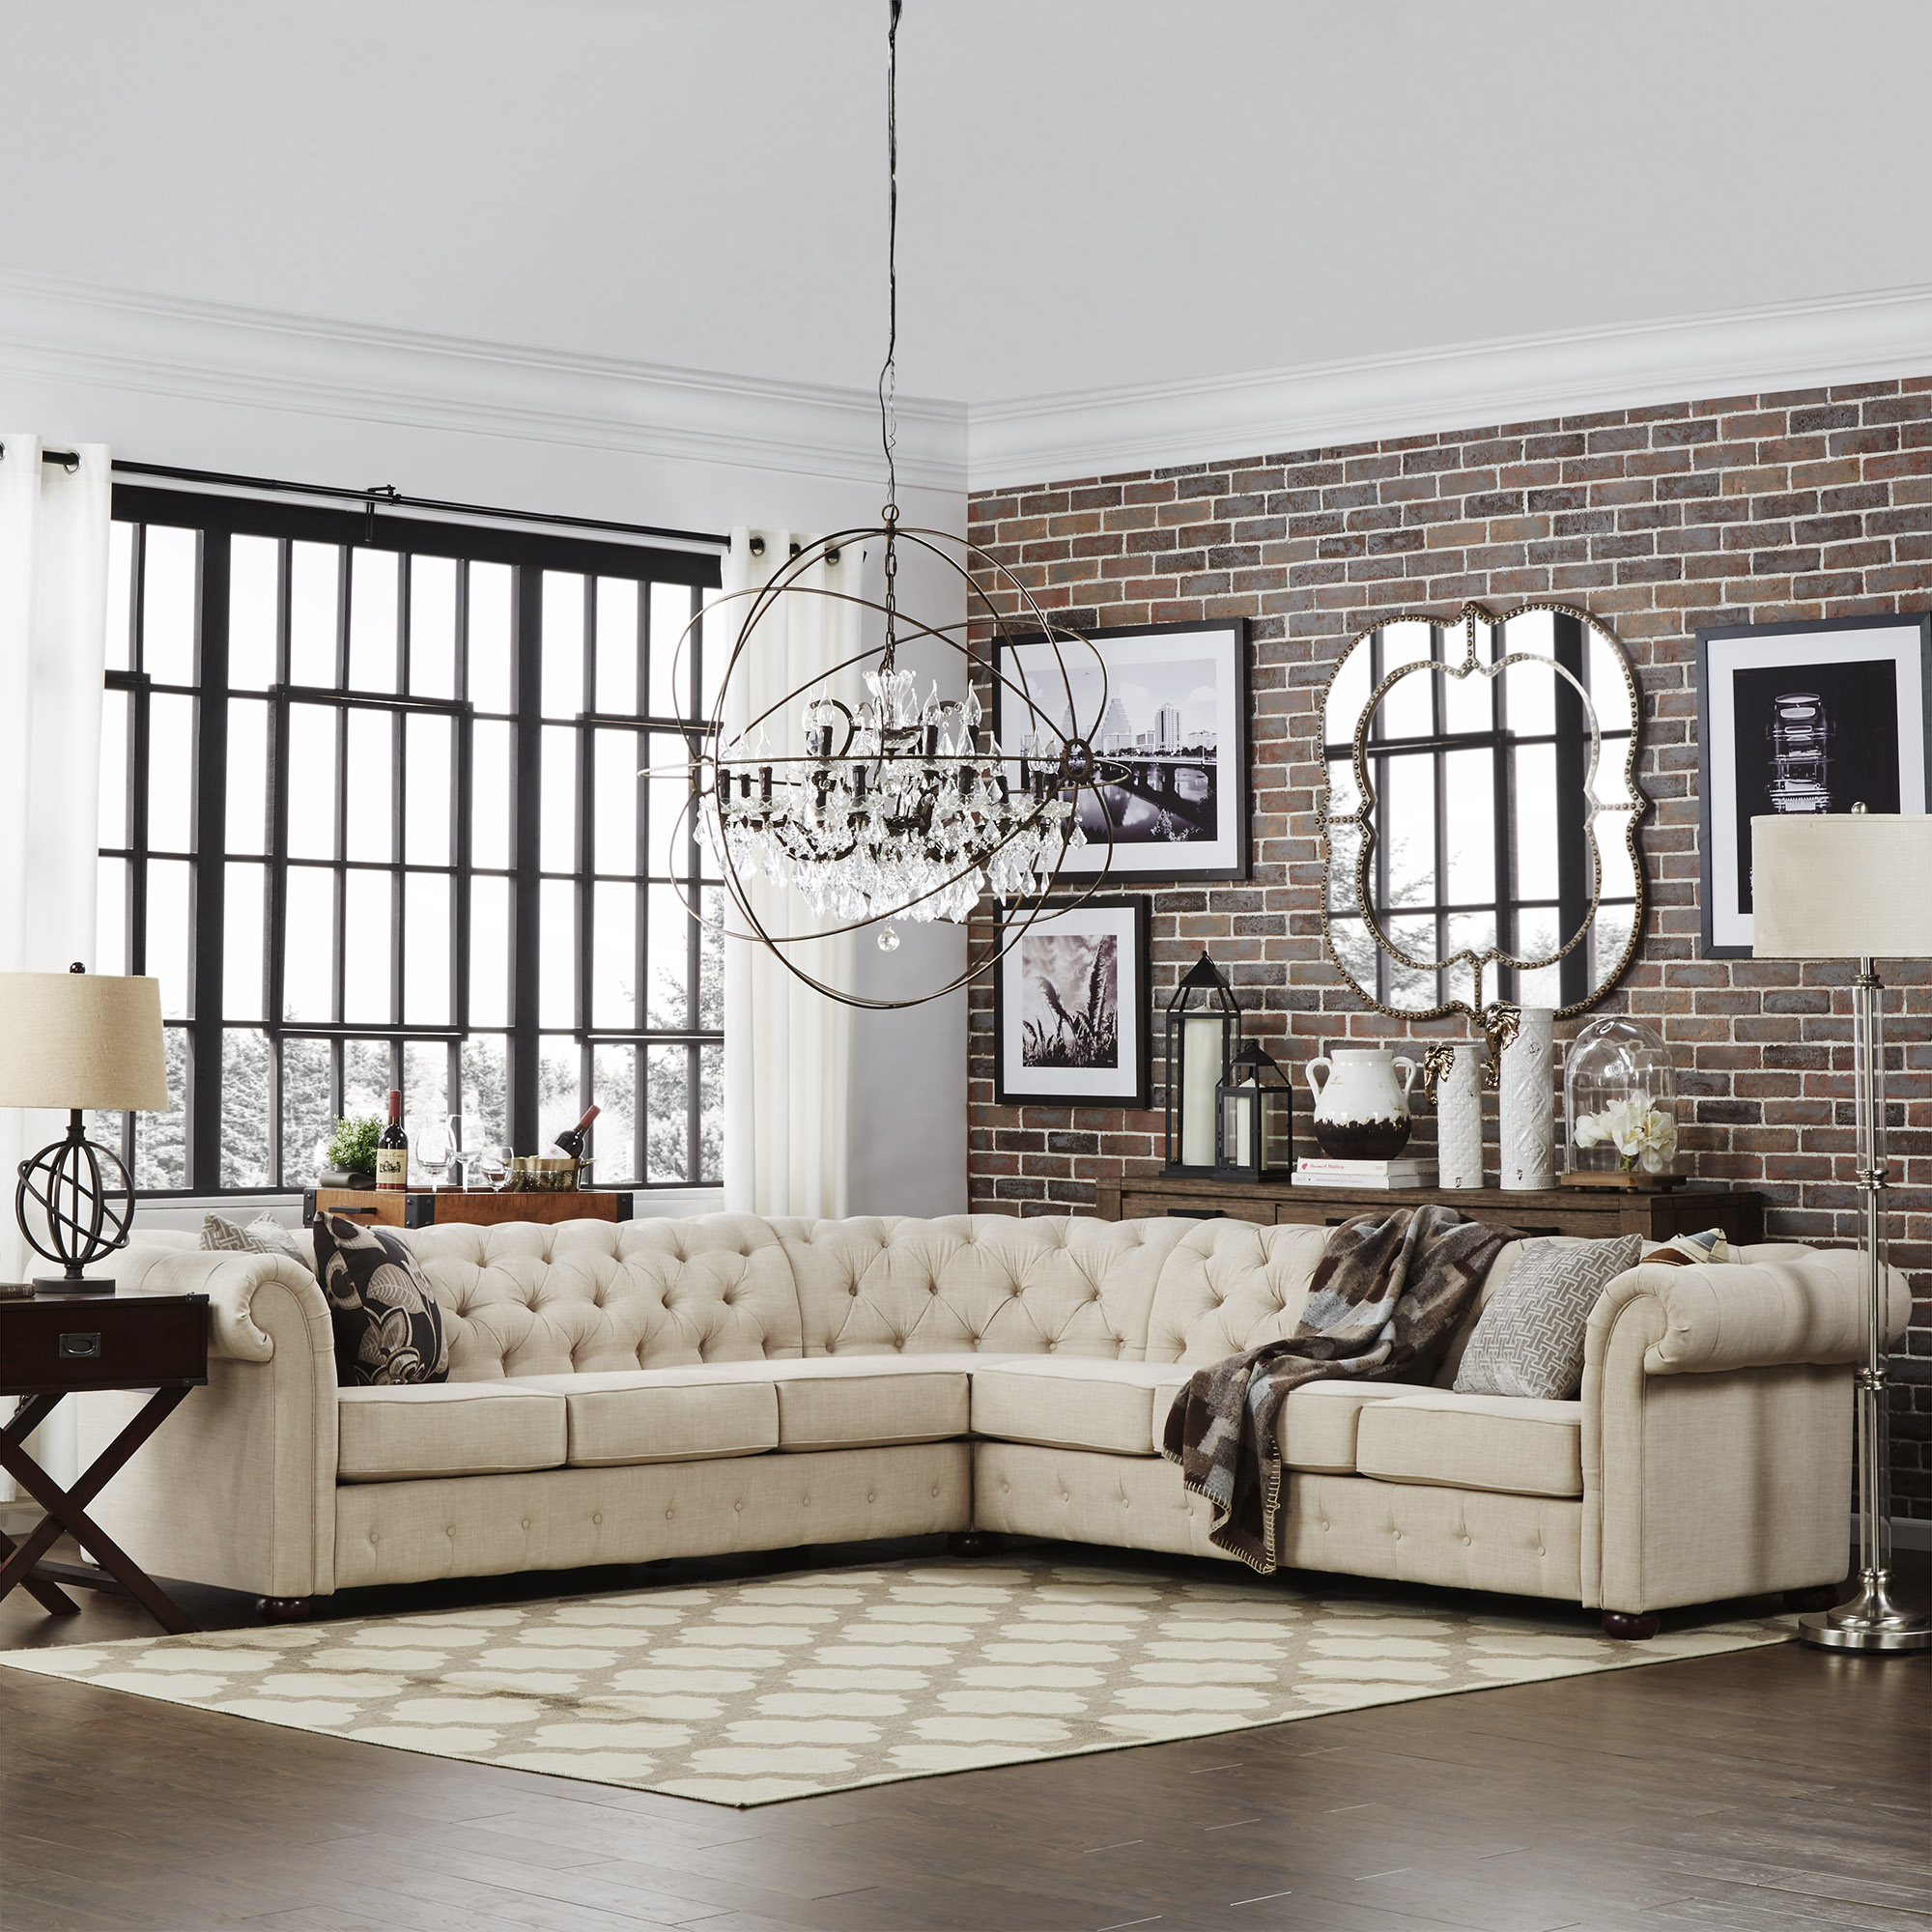 7-Seat L-Shaped Chesterfield Sectional Sofa